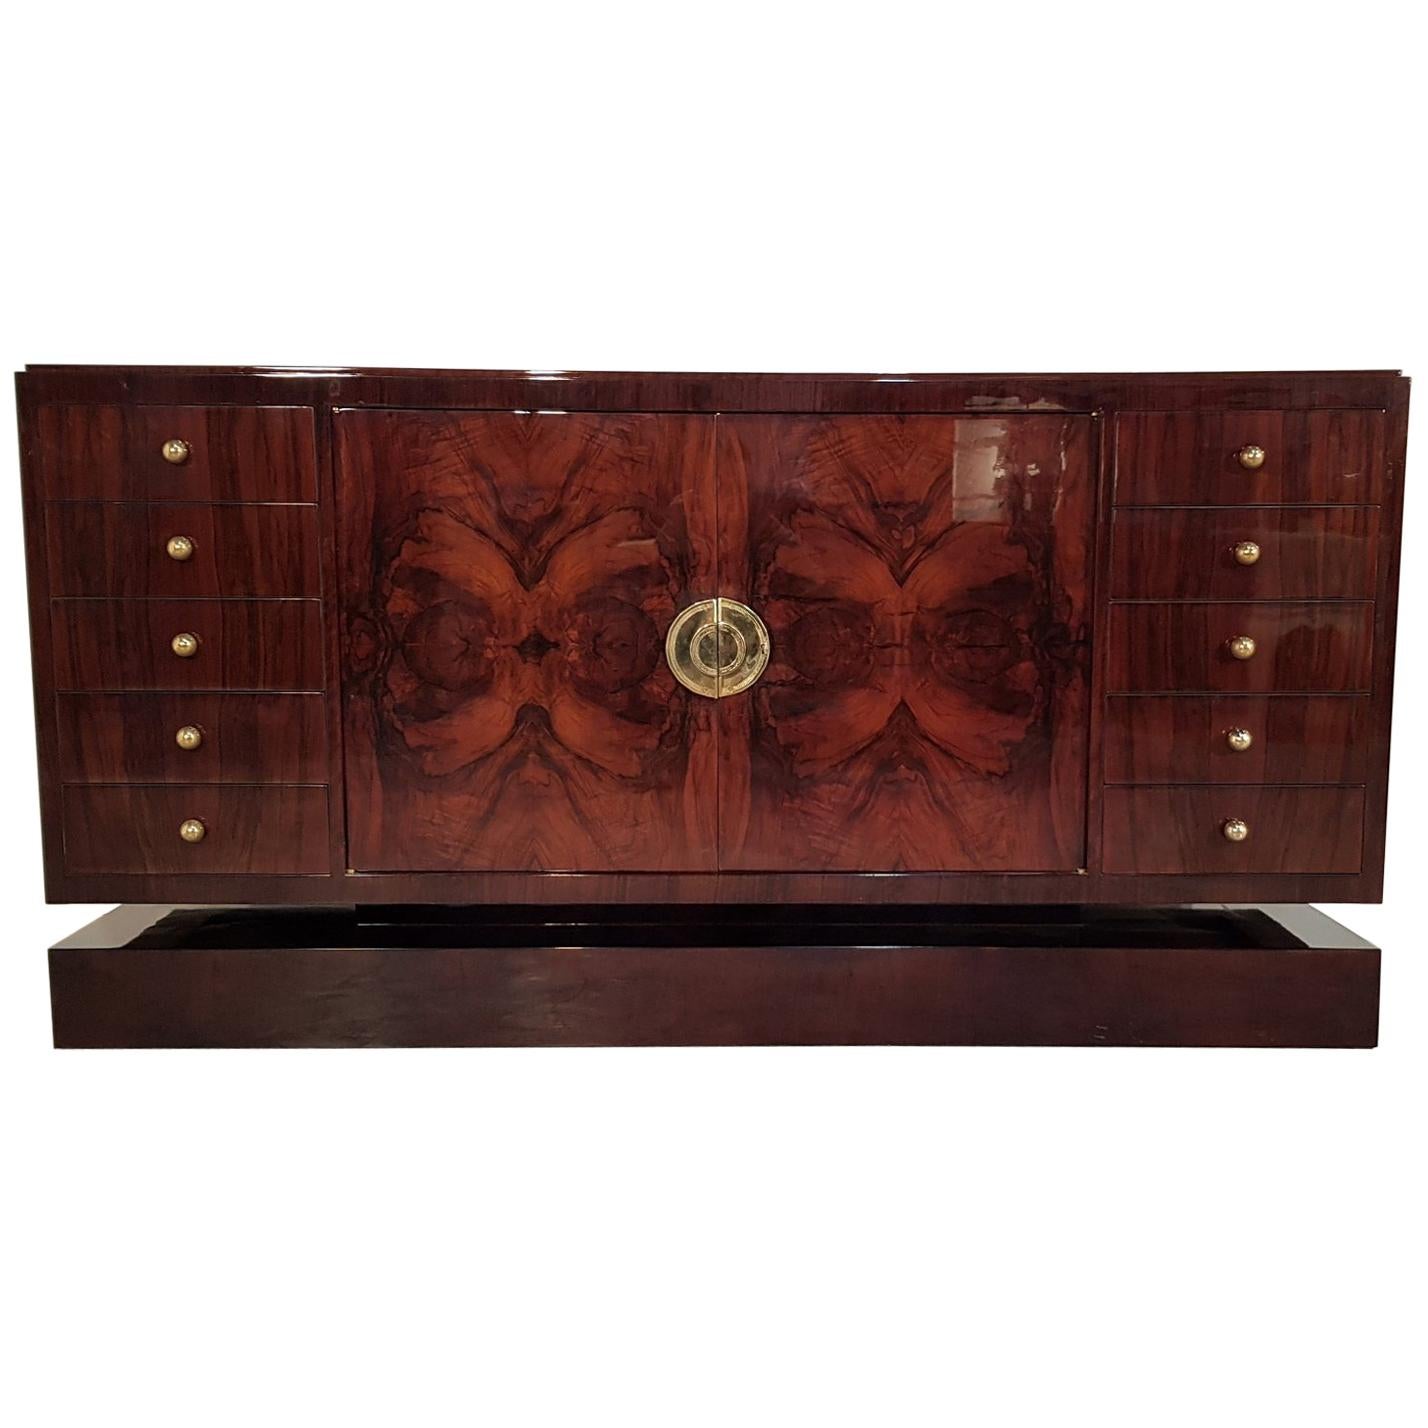 French Art Deco Walnut Burl Sideboard with Brass Handles, 1930s For Sale